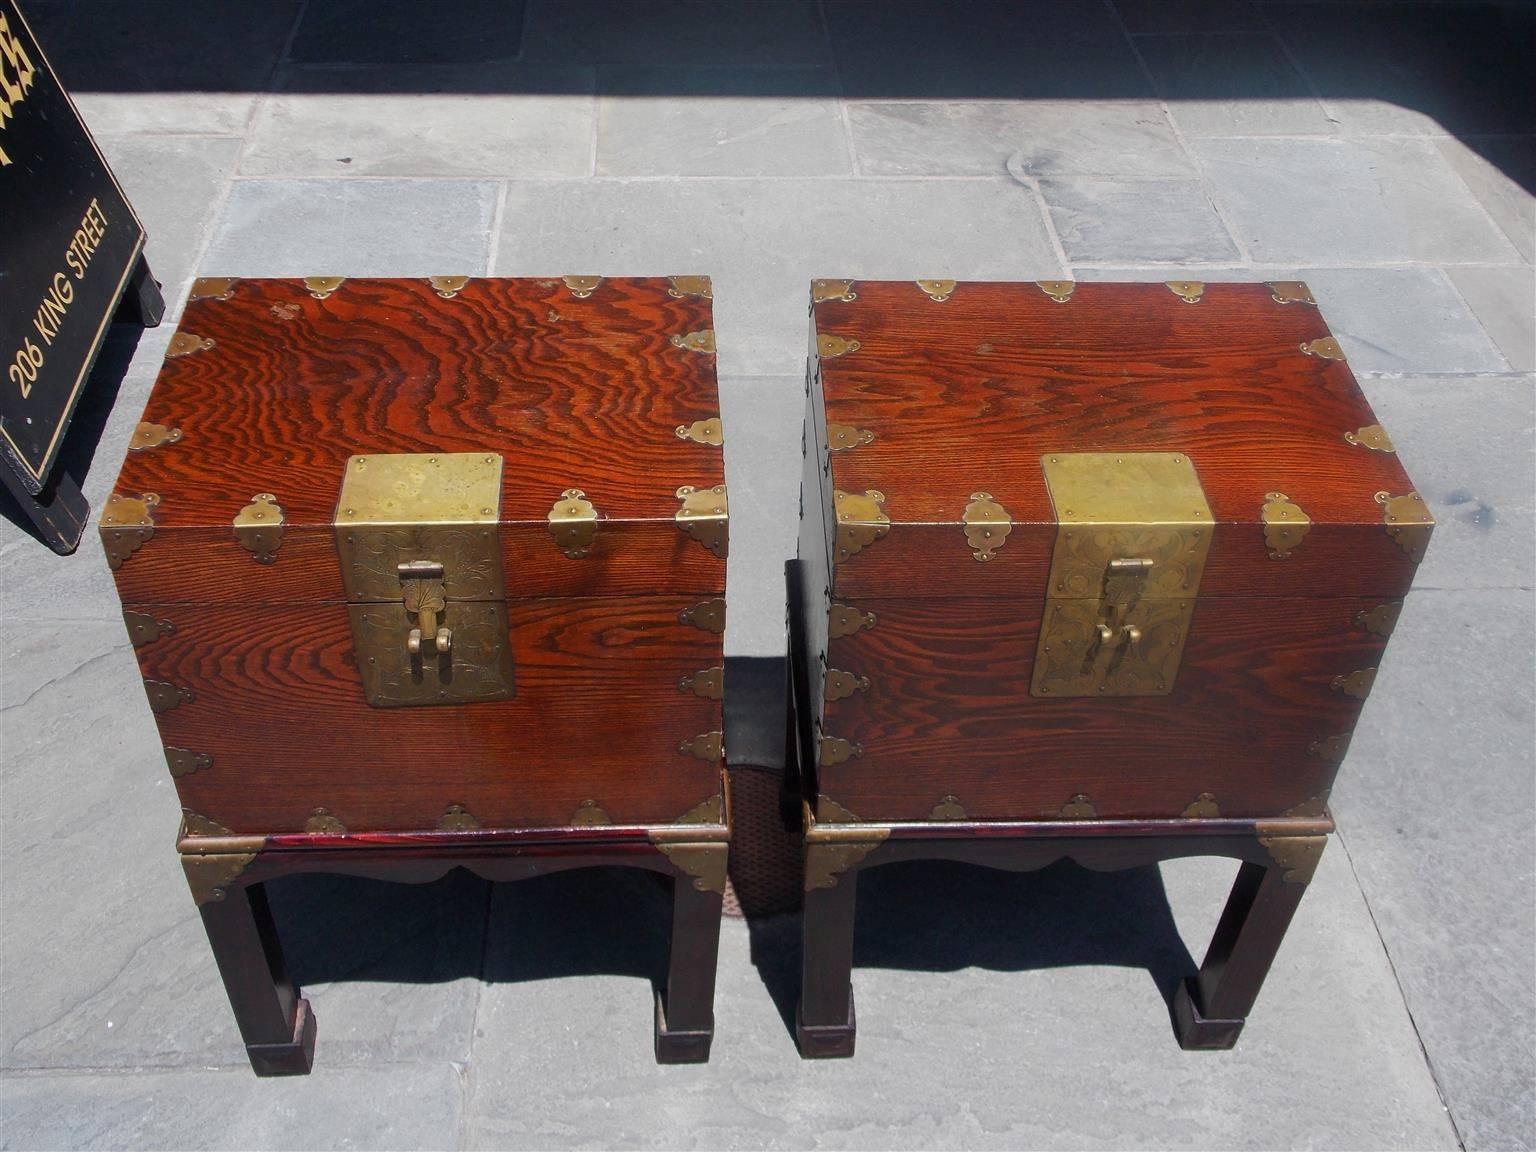 Pair of Chinese document boxes on stand with original brass chased mounts, paper lined interior with Chinese writing, carved scalloped skirts , and resting on rectangular stands with squared legs and Marlboro feet. Boxes retain the original paper